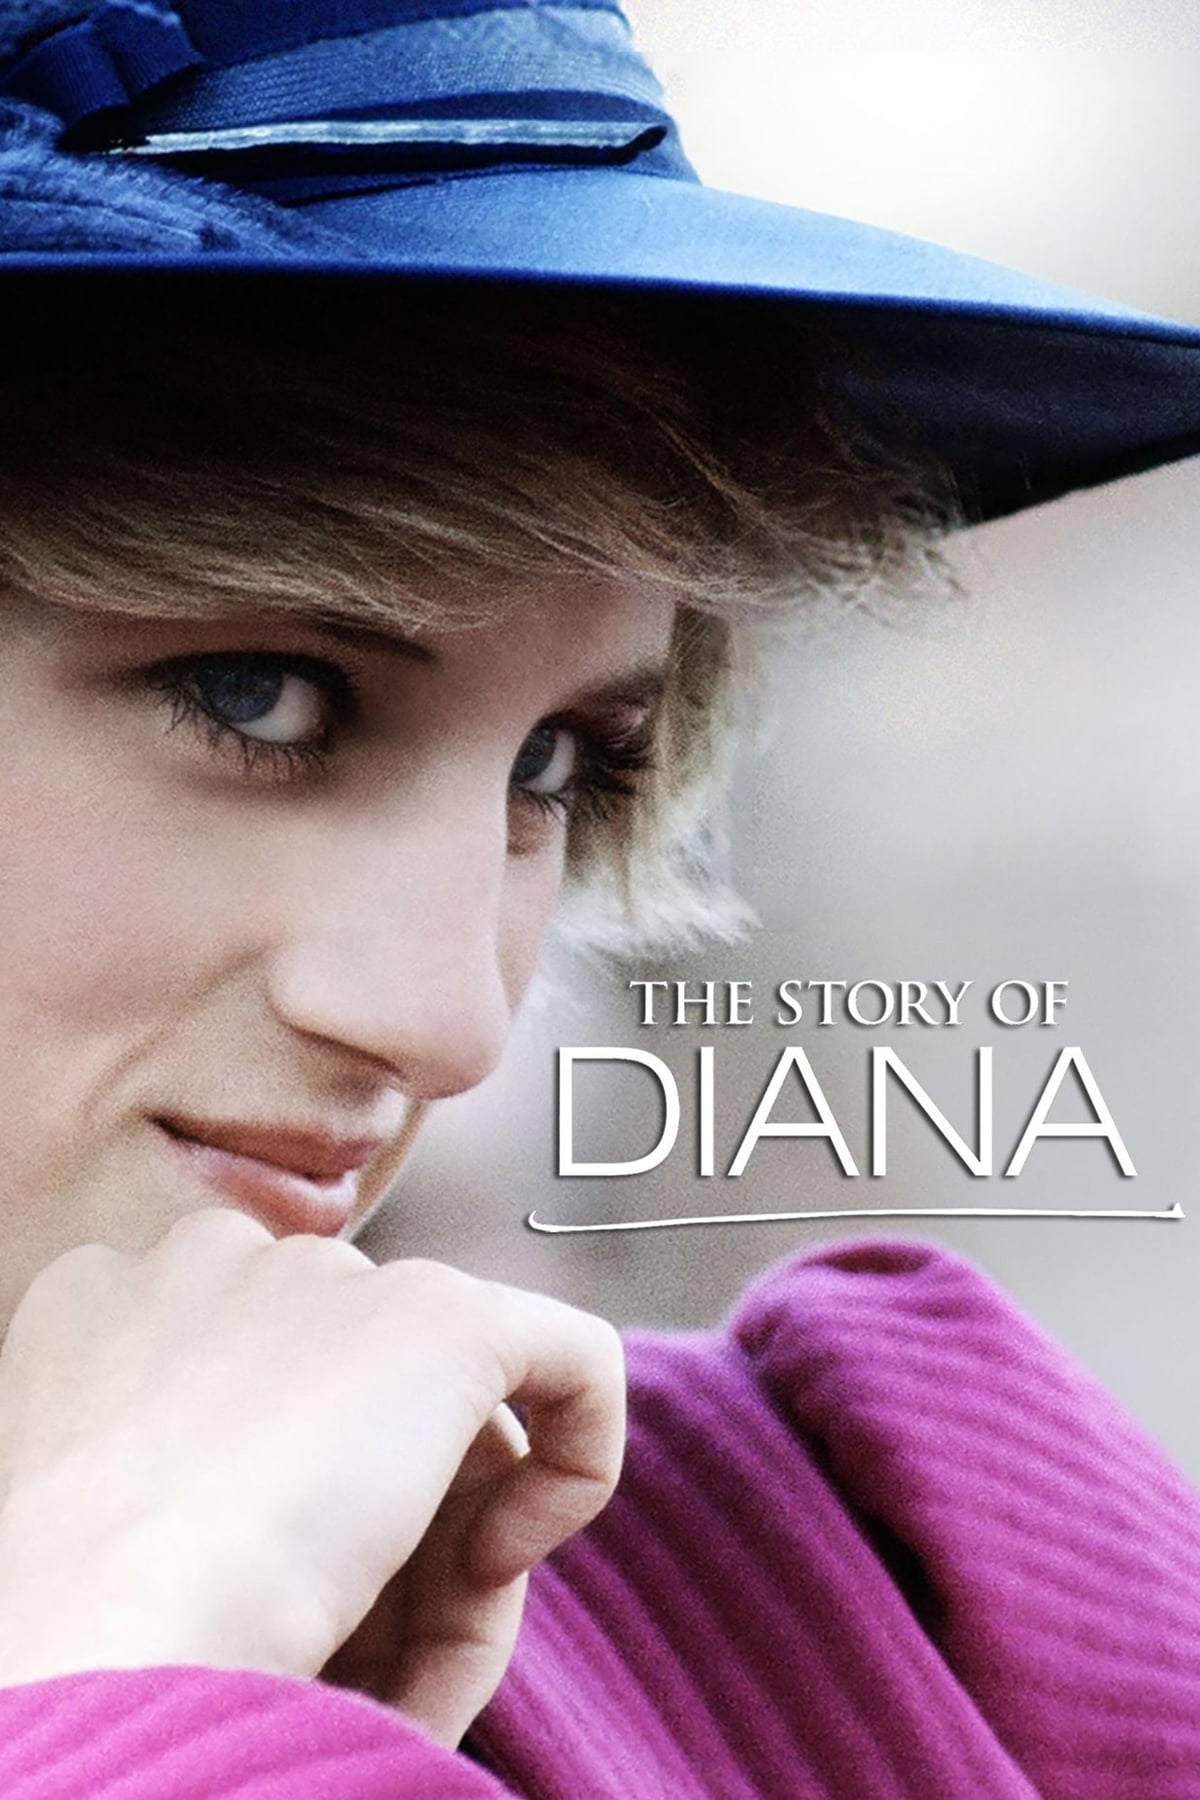 The Story of Diana TV Shows About Tragedy